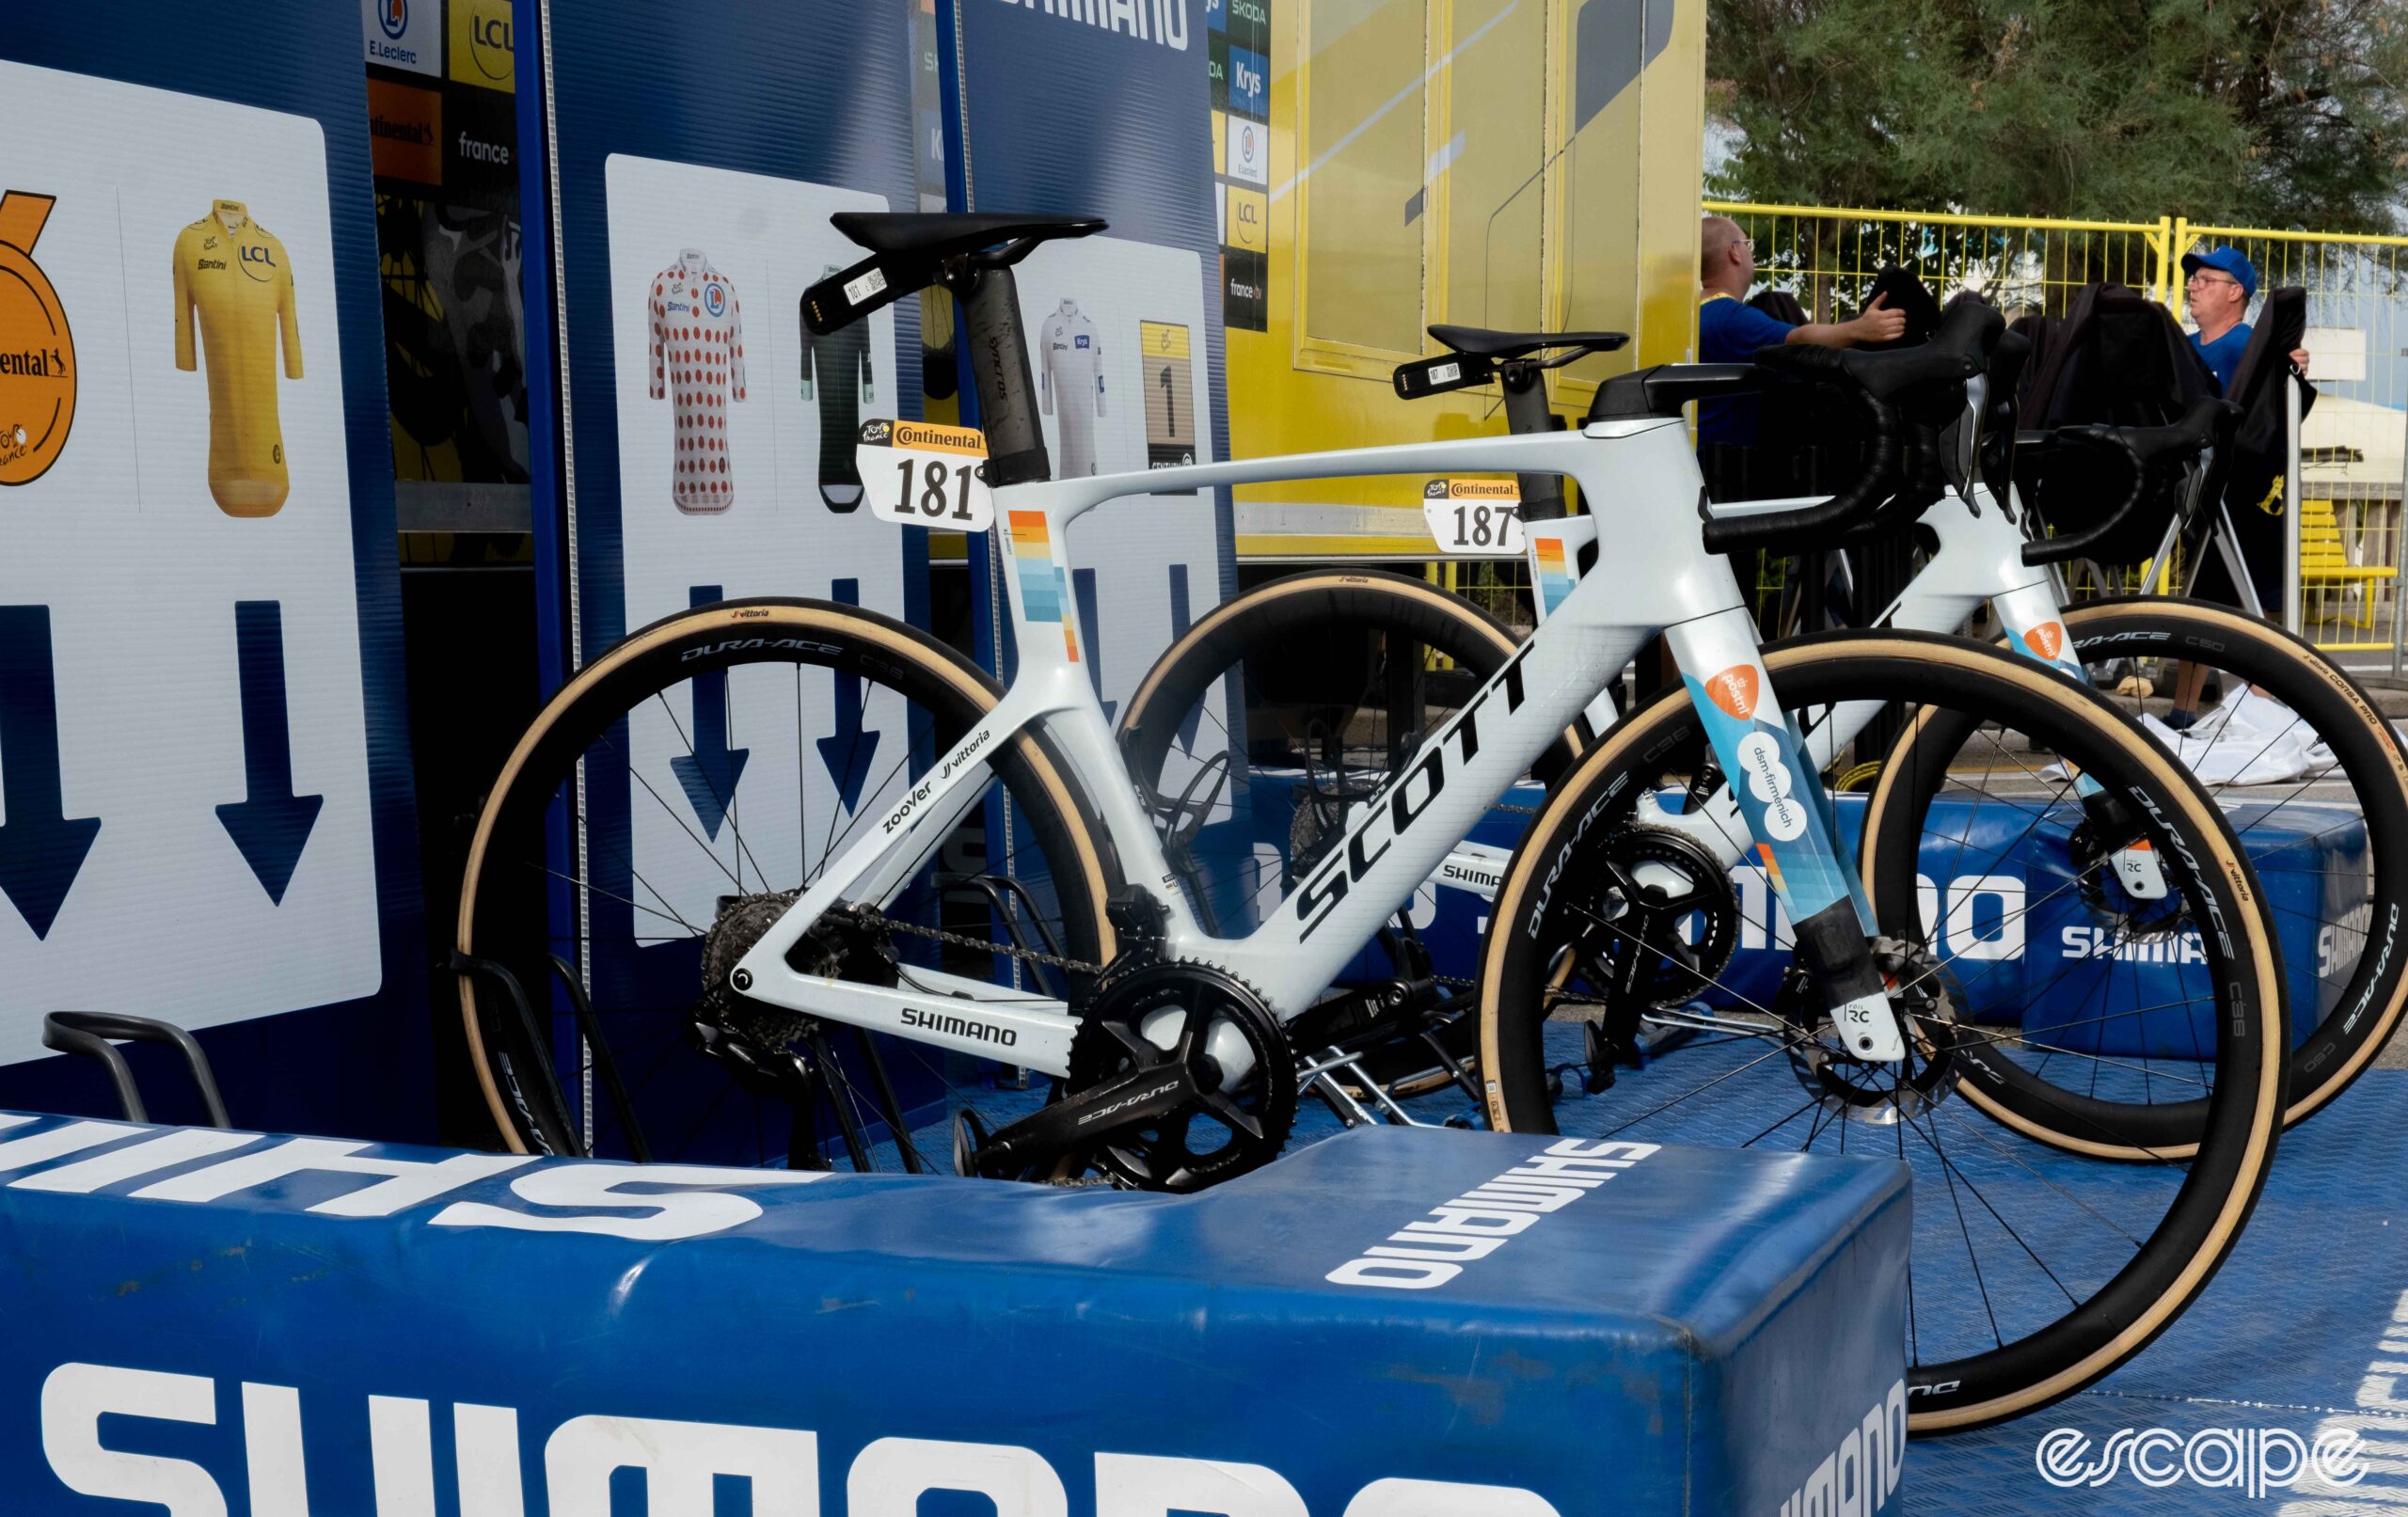 The photo shows Bardet's bike with van den Broek's in the background.